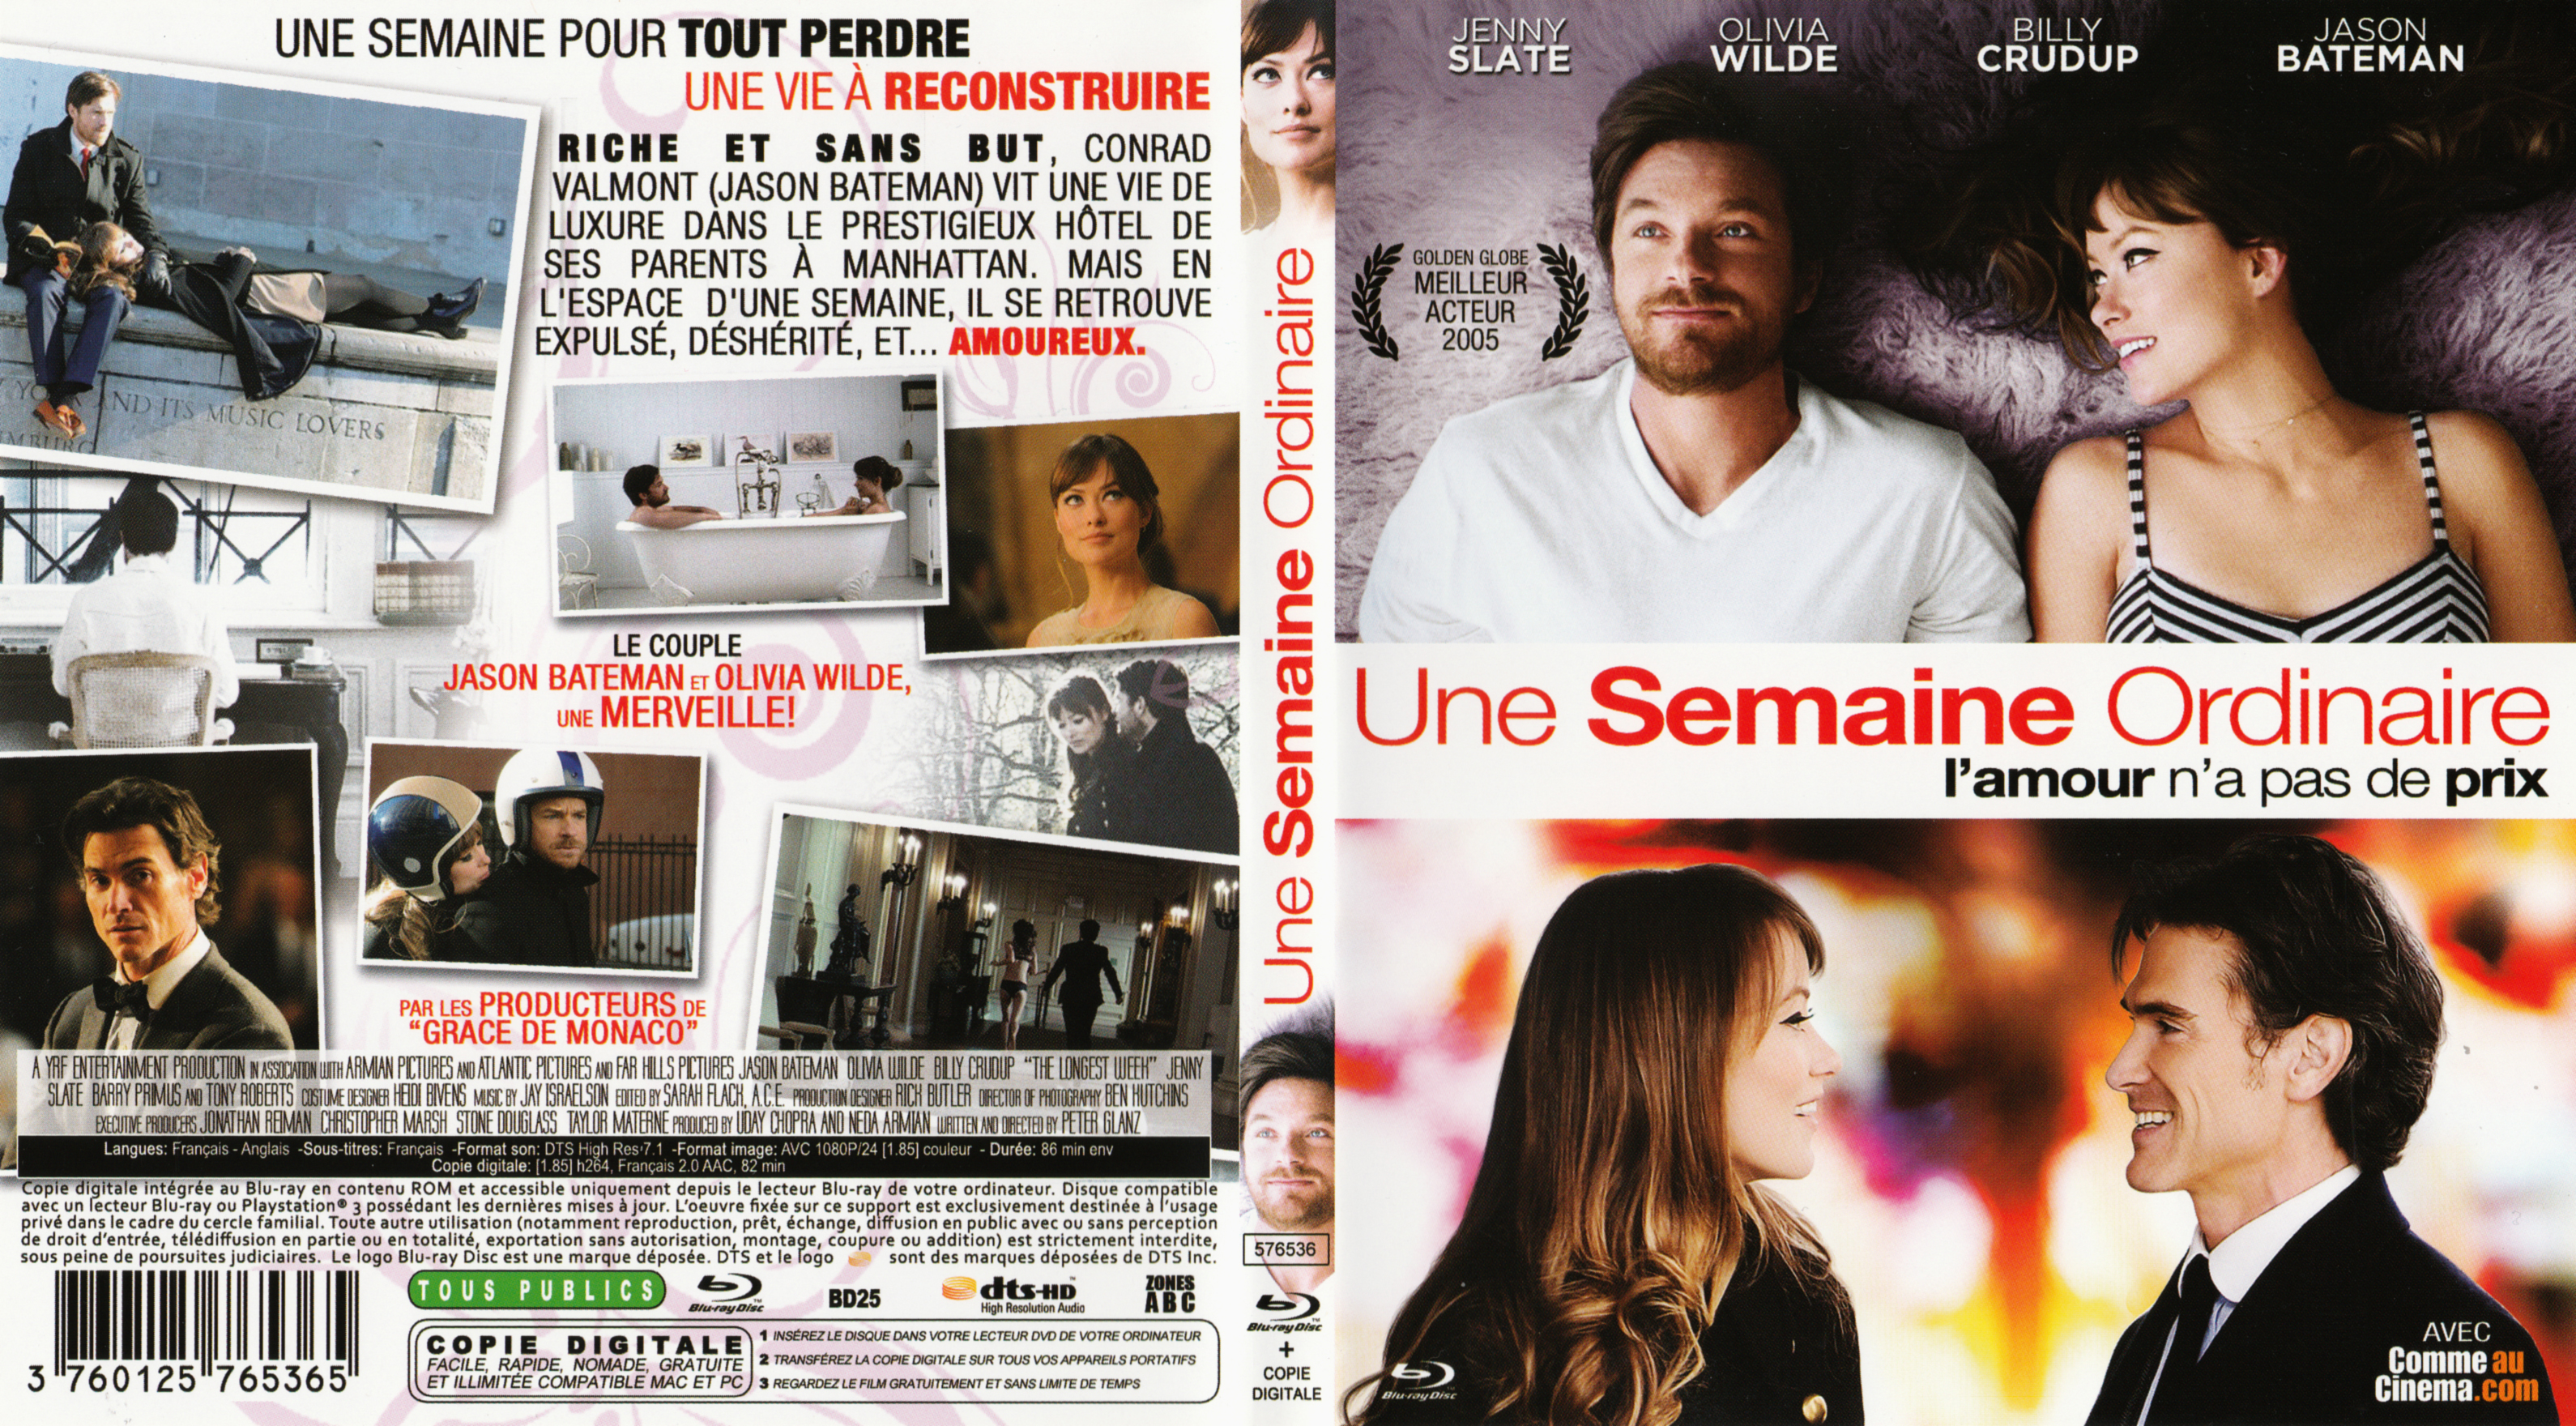 Jaquette DVD Une semaine ordinaire (BLU-RAY)